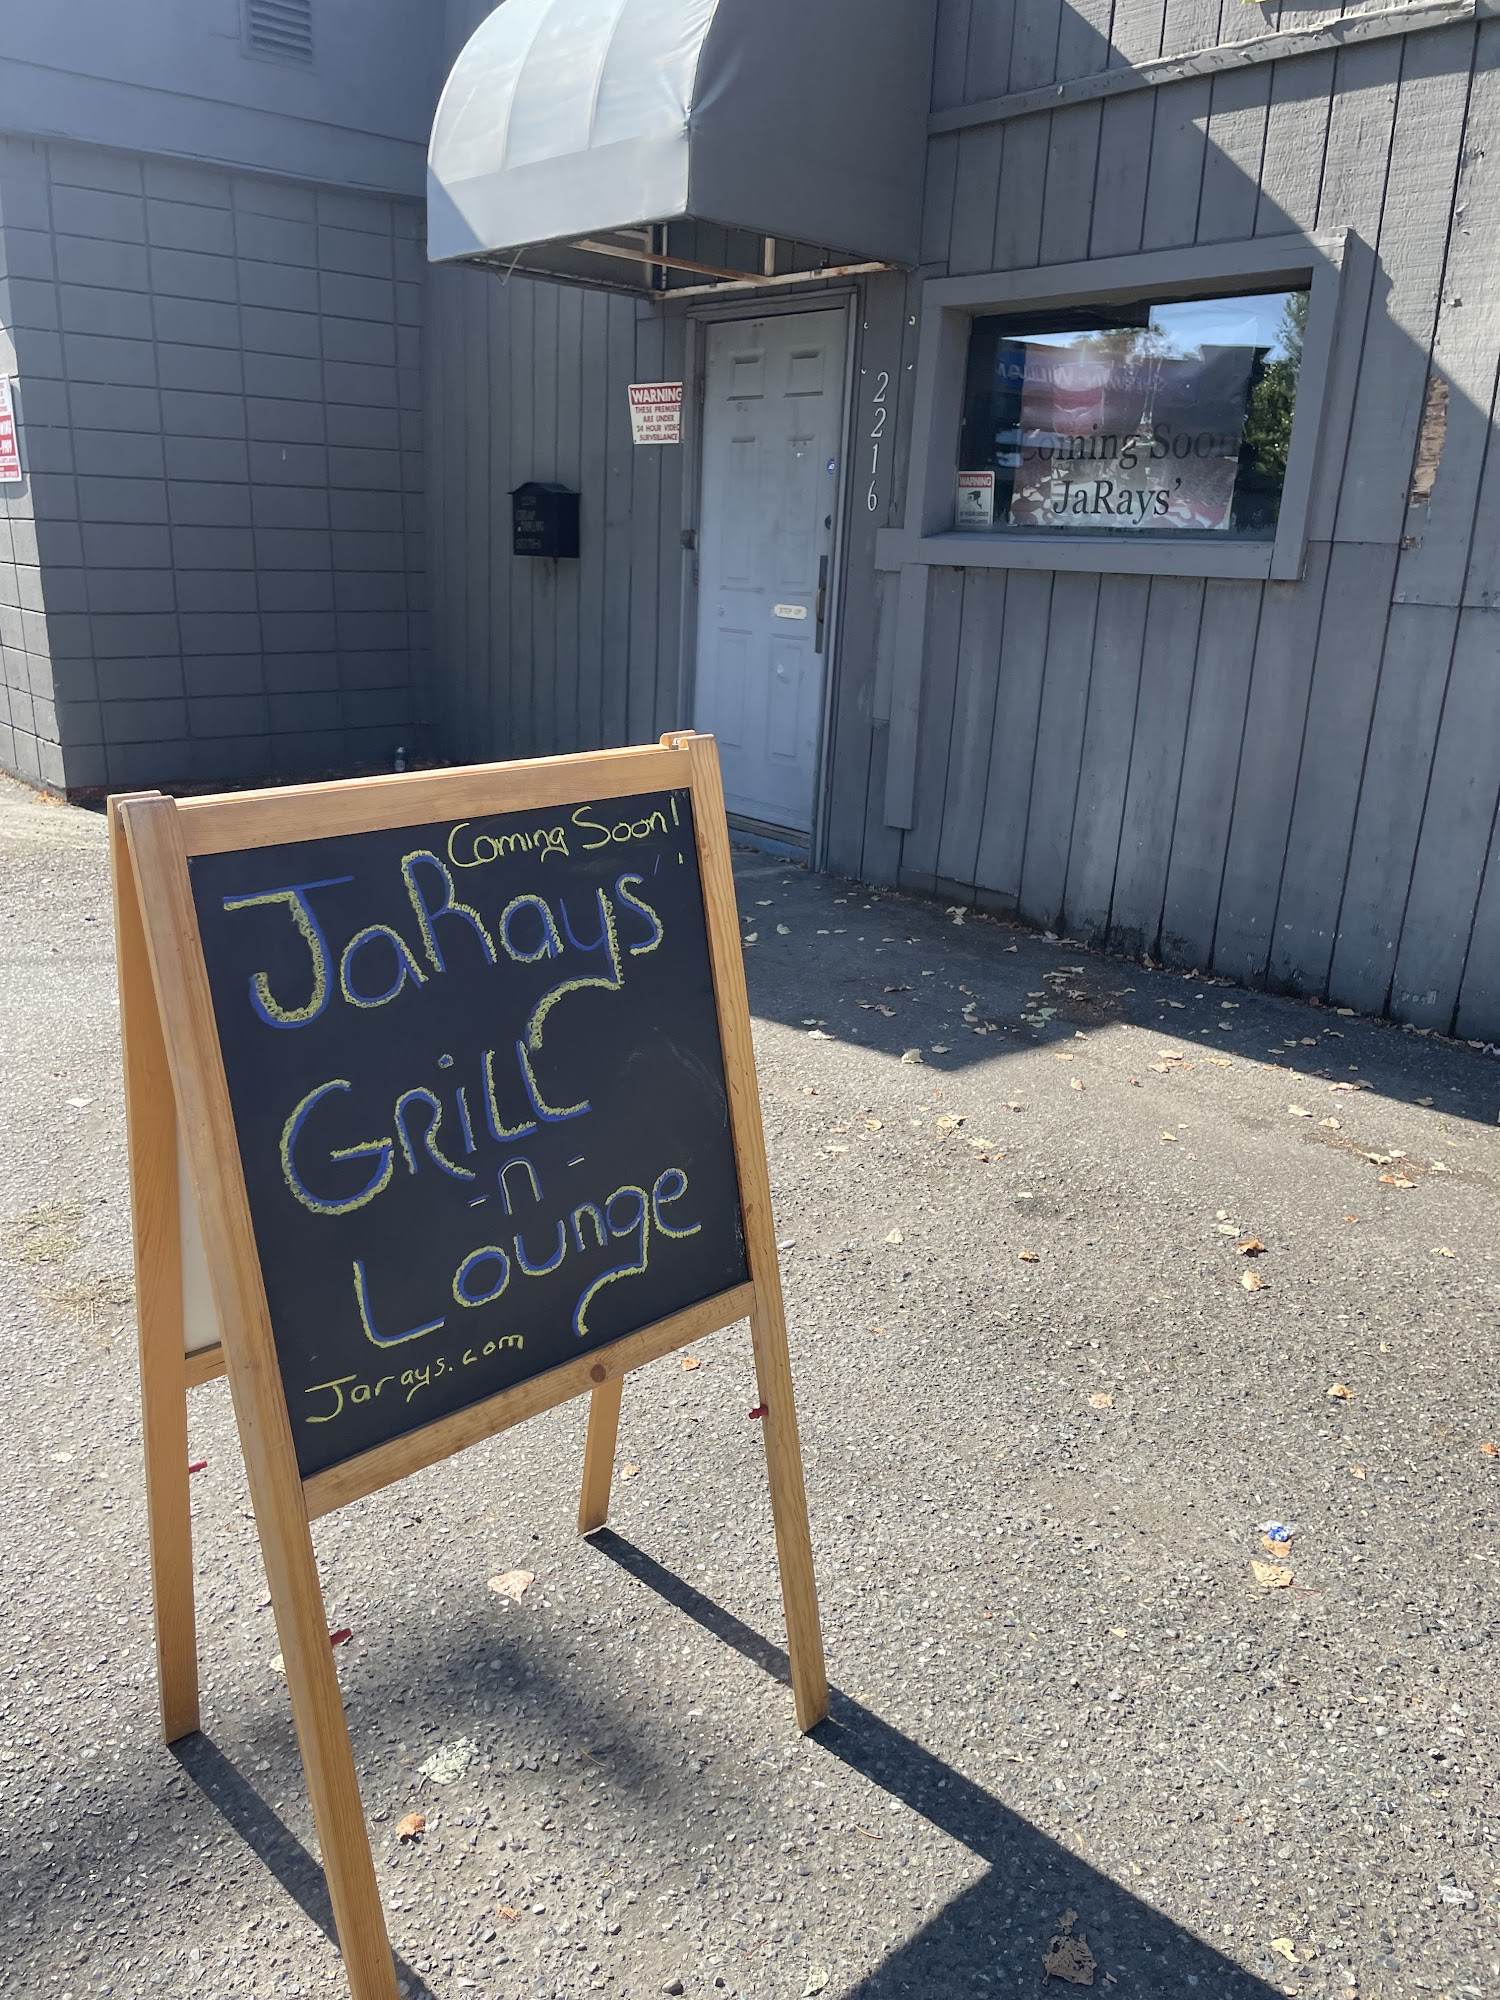 JaRay’s Grill and Lounge